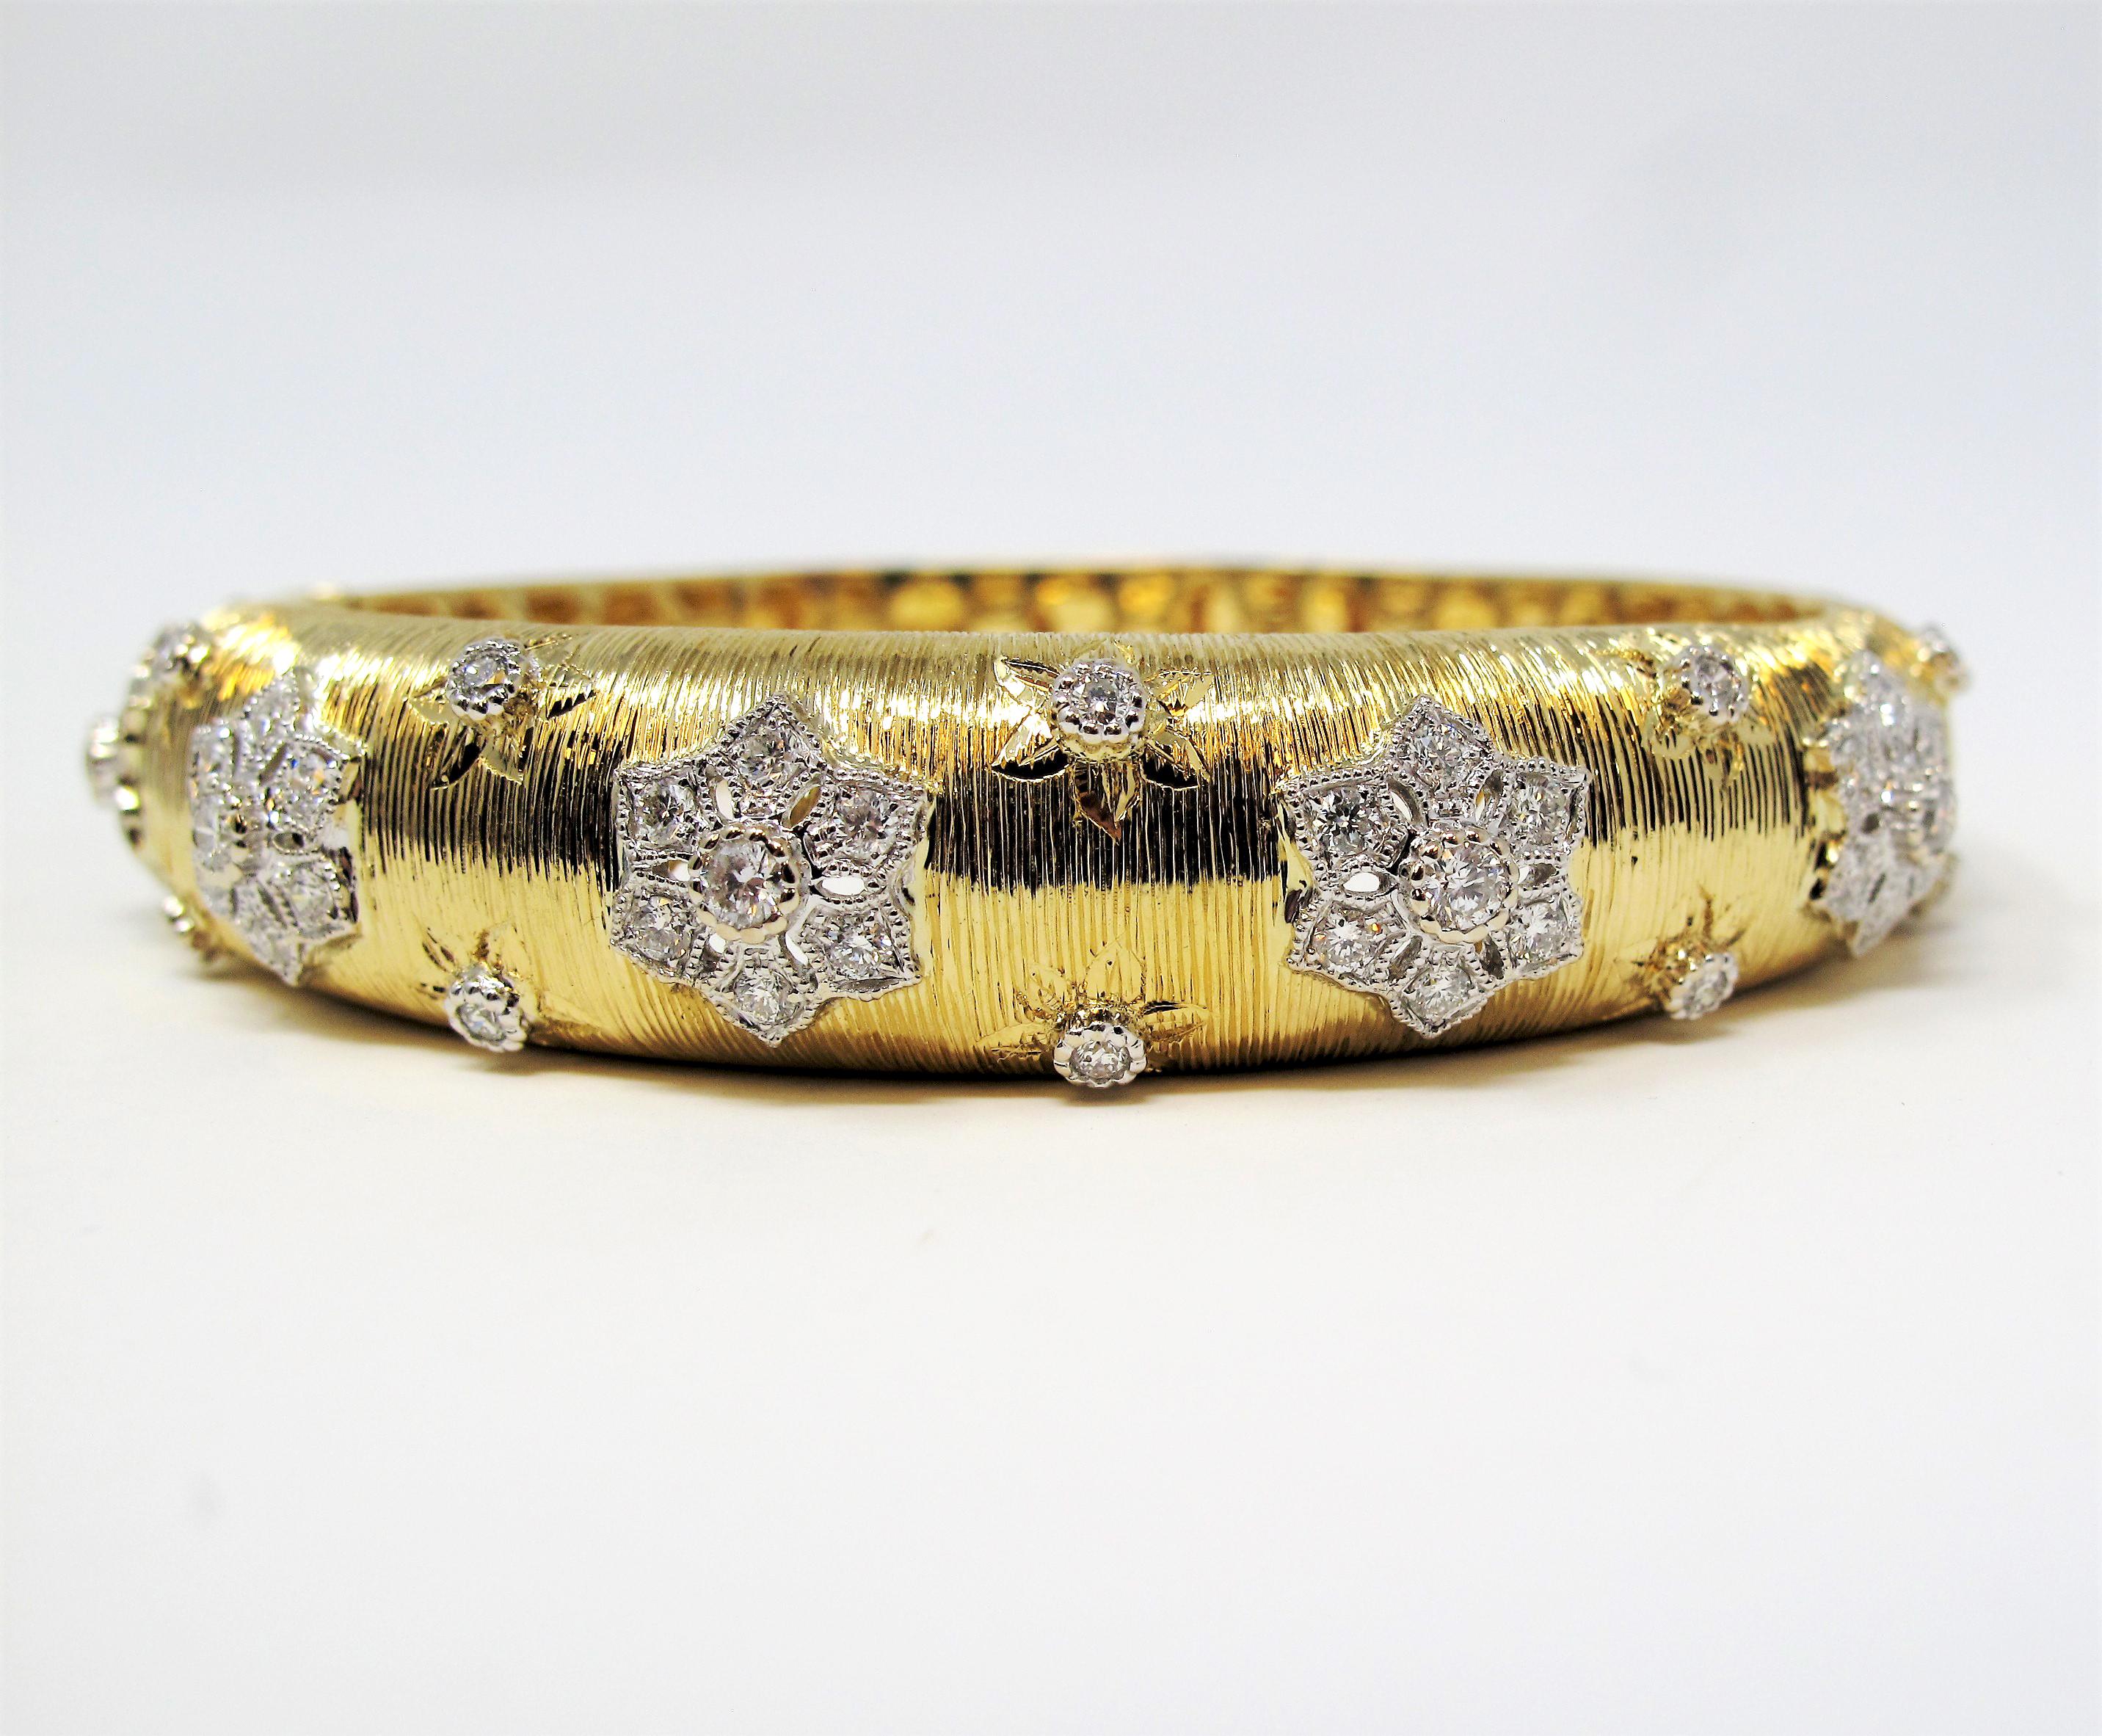 Fall in love with this romantic diamond floral bangle bracelet. This beautiful  piece features a textured yellow gold bracelet embellished with sparkling round white diamonds set in a floral design. It has a stunning elegance without being over the